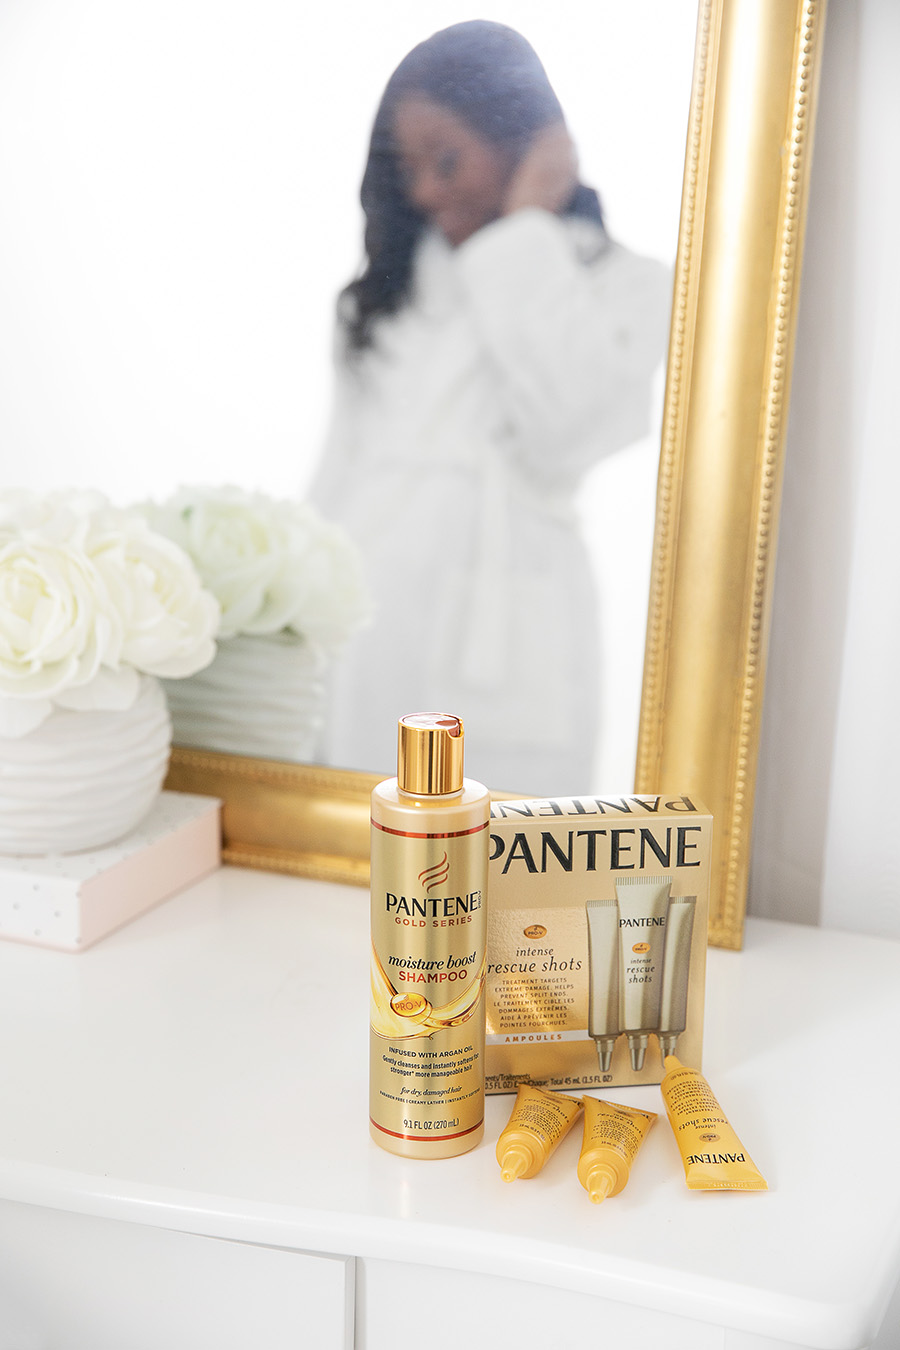  How To Maintain A Healthy Hair with Pantene